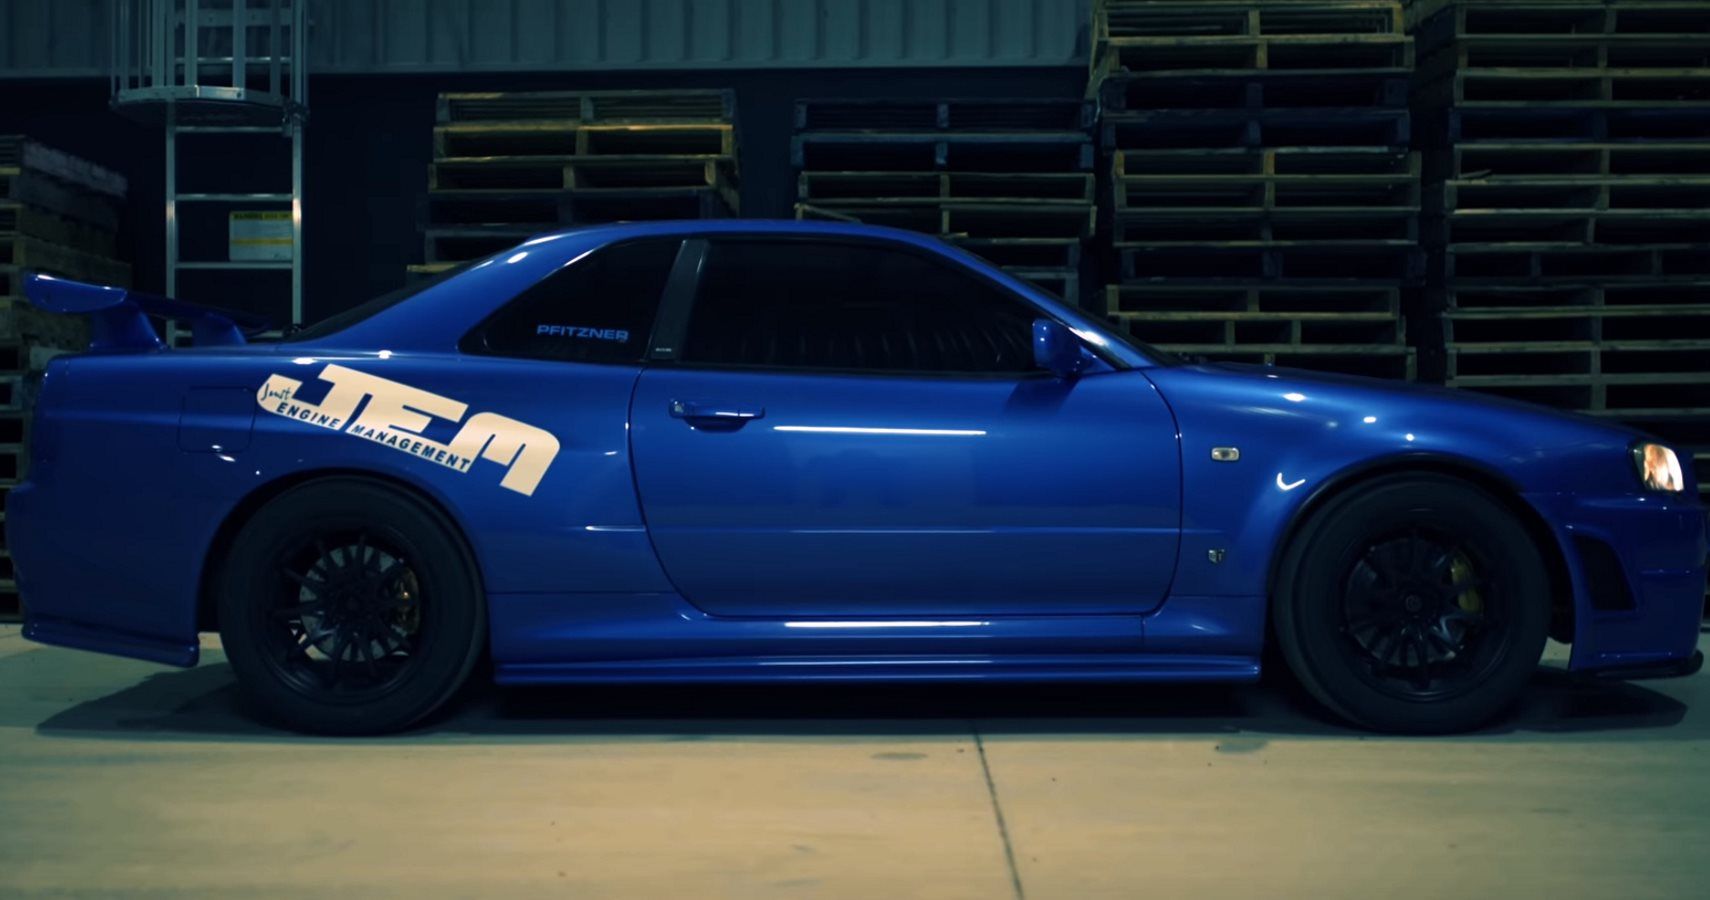 Check Out This Insanely Powerful Tuned Nissan R34 Skyline